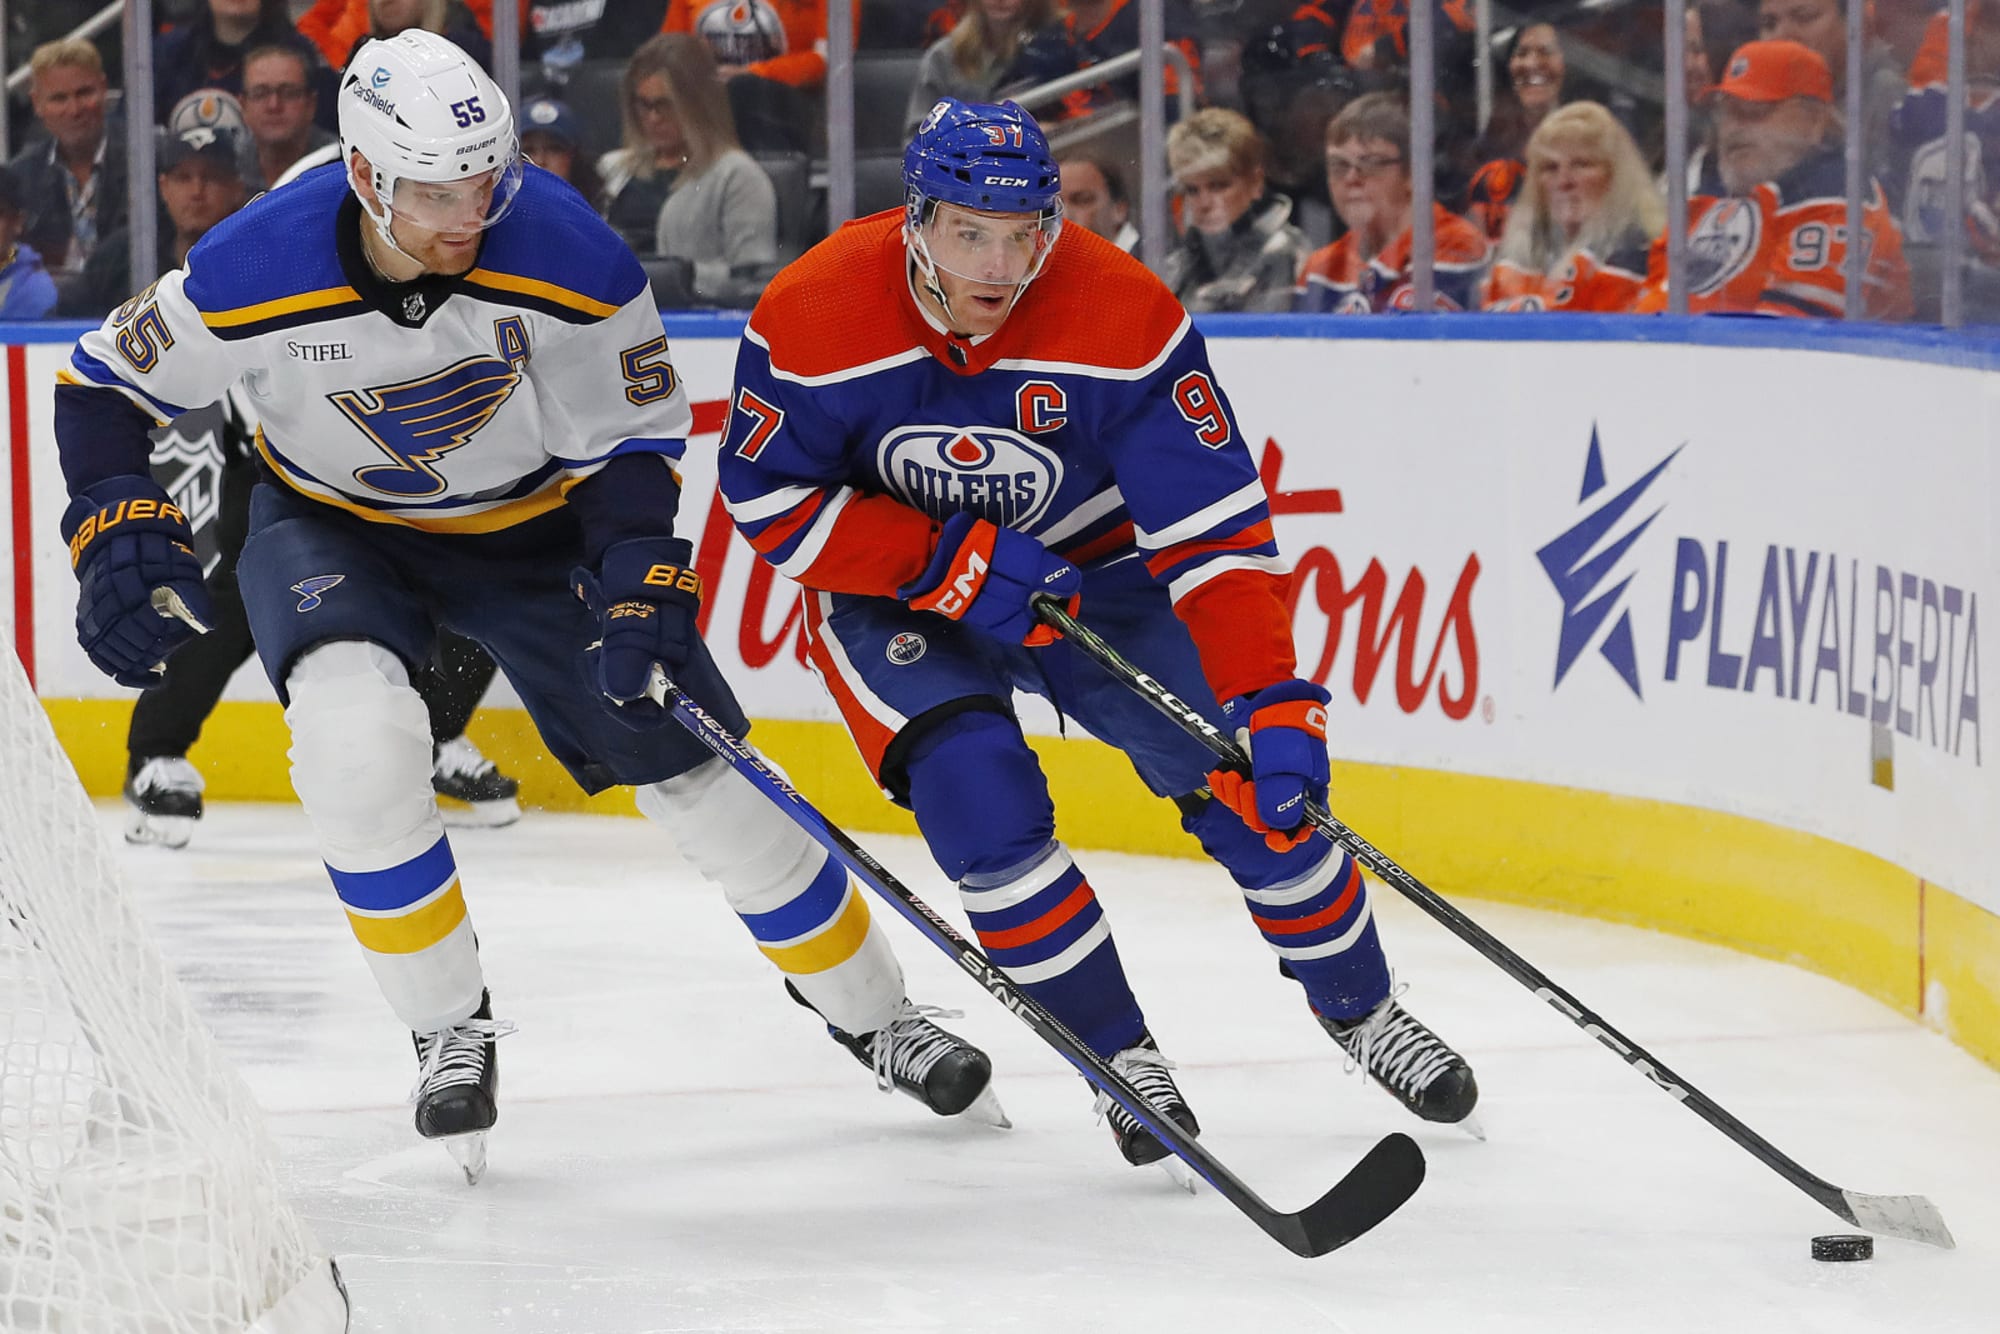 Edmonton Oilers Vs Blues Date, Time, Streaming, Betting Odds, More